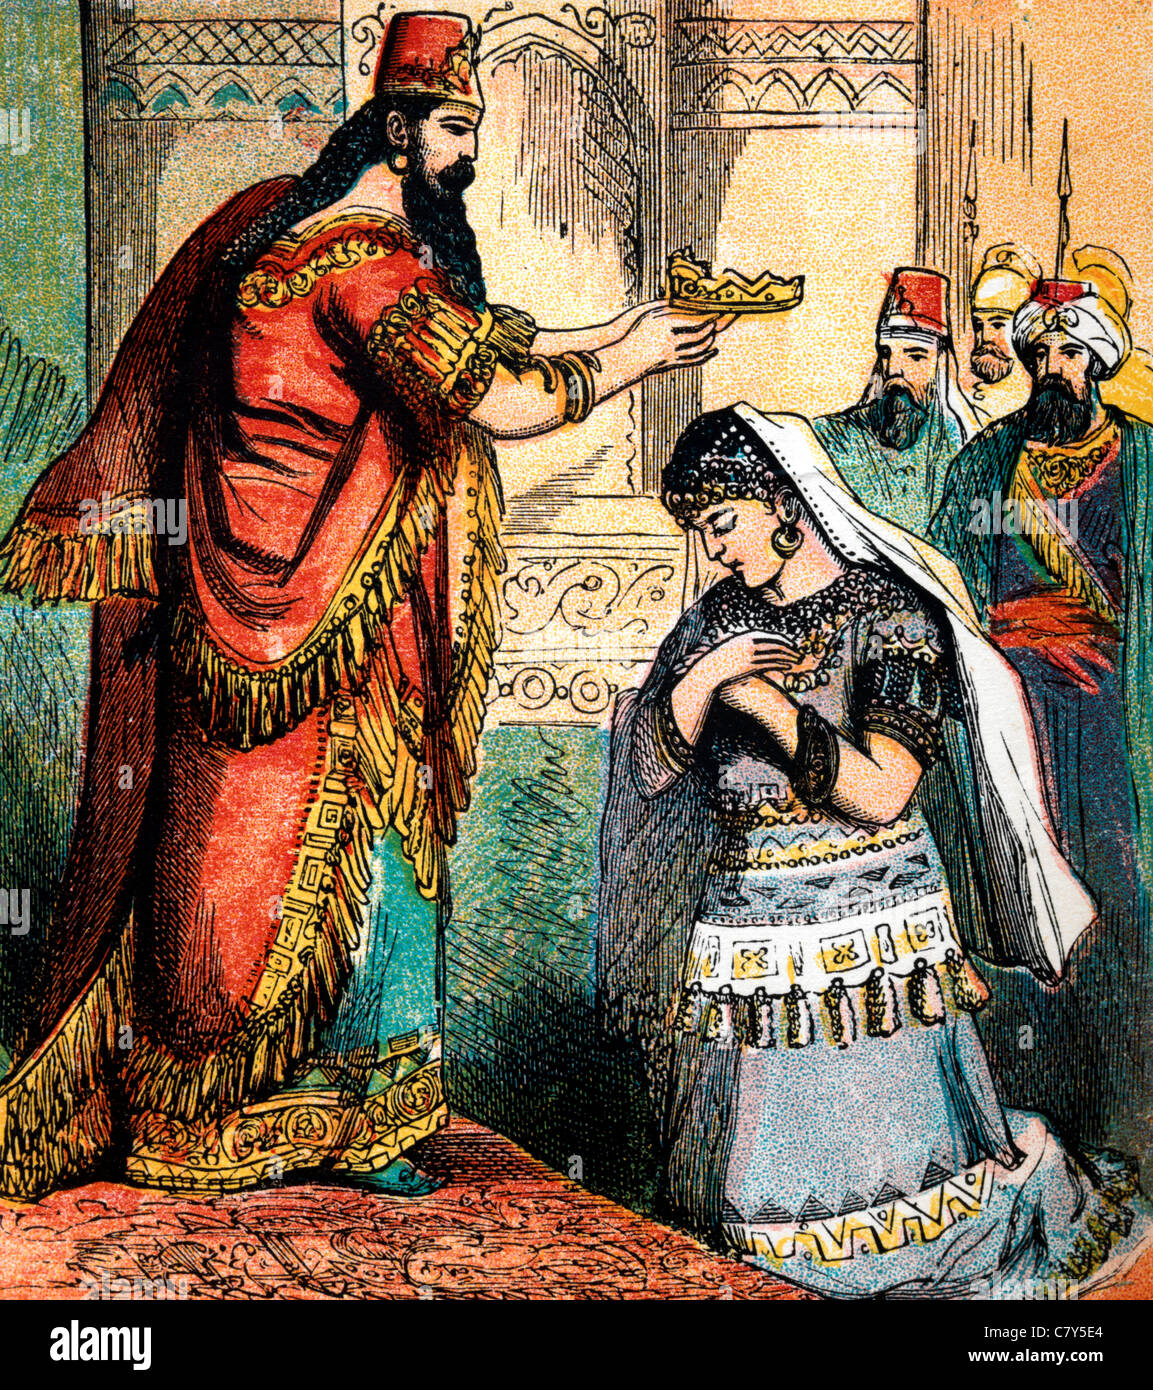 Bible Stories - Illustration Of King Ahasuerus Placing The Crown Upon Esther's Head Making Her Queen Stock Photo